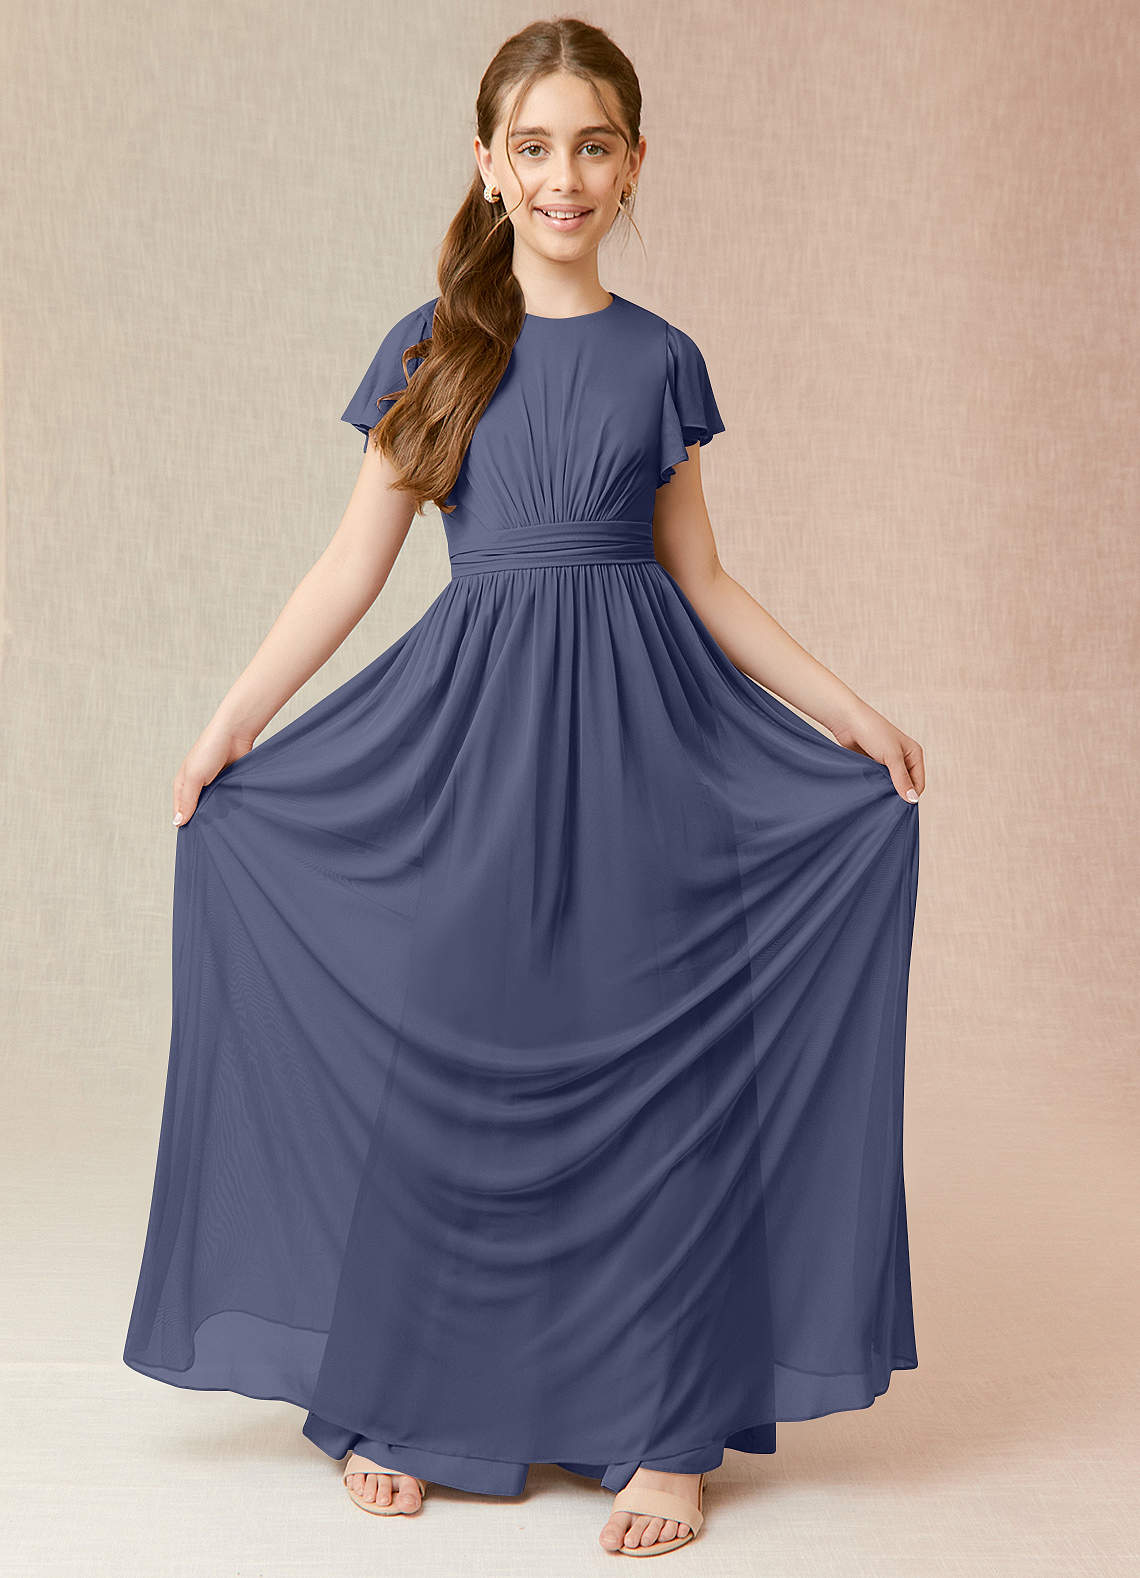 Azazie Mosley A-Line Ruched Mesh Floor-Length Junior Bridesmaid Dress image1